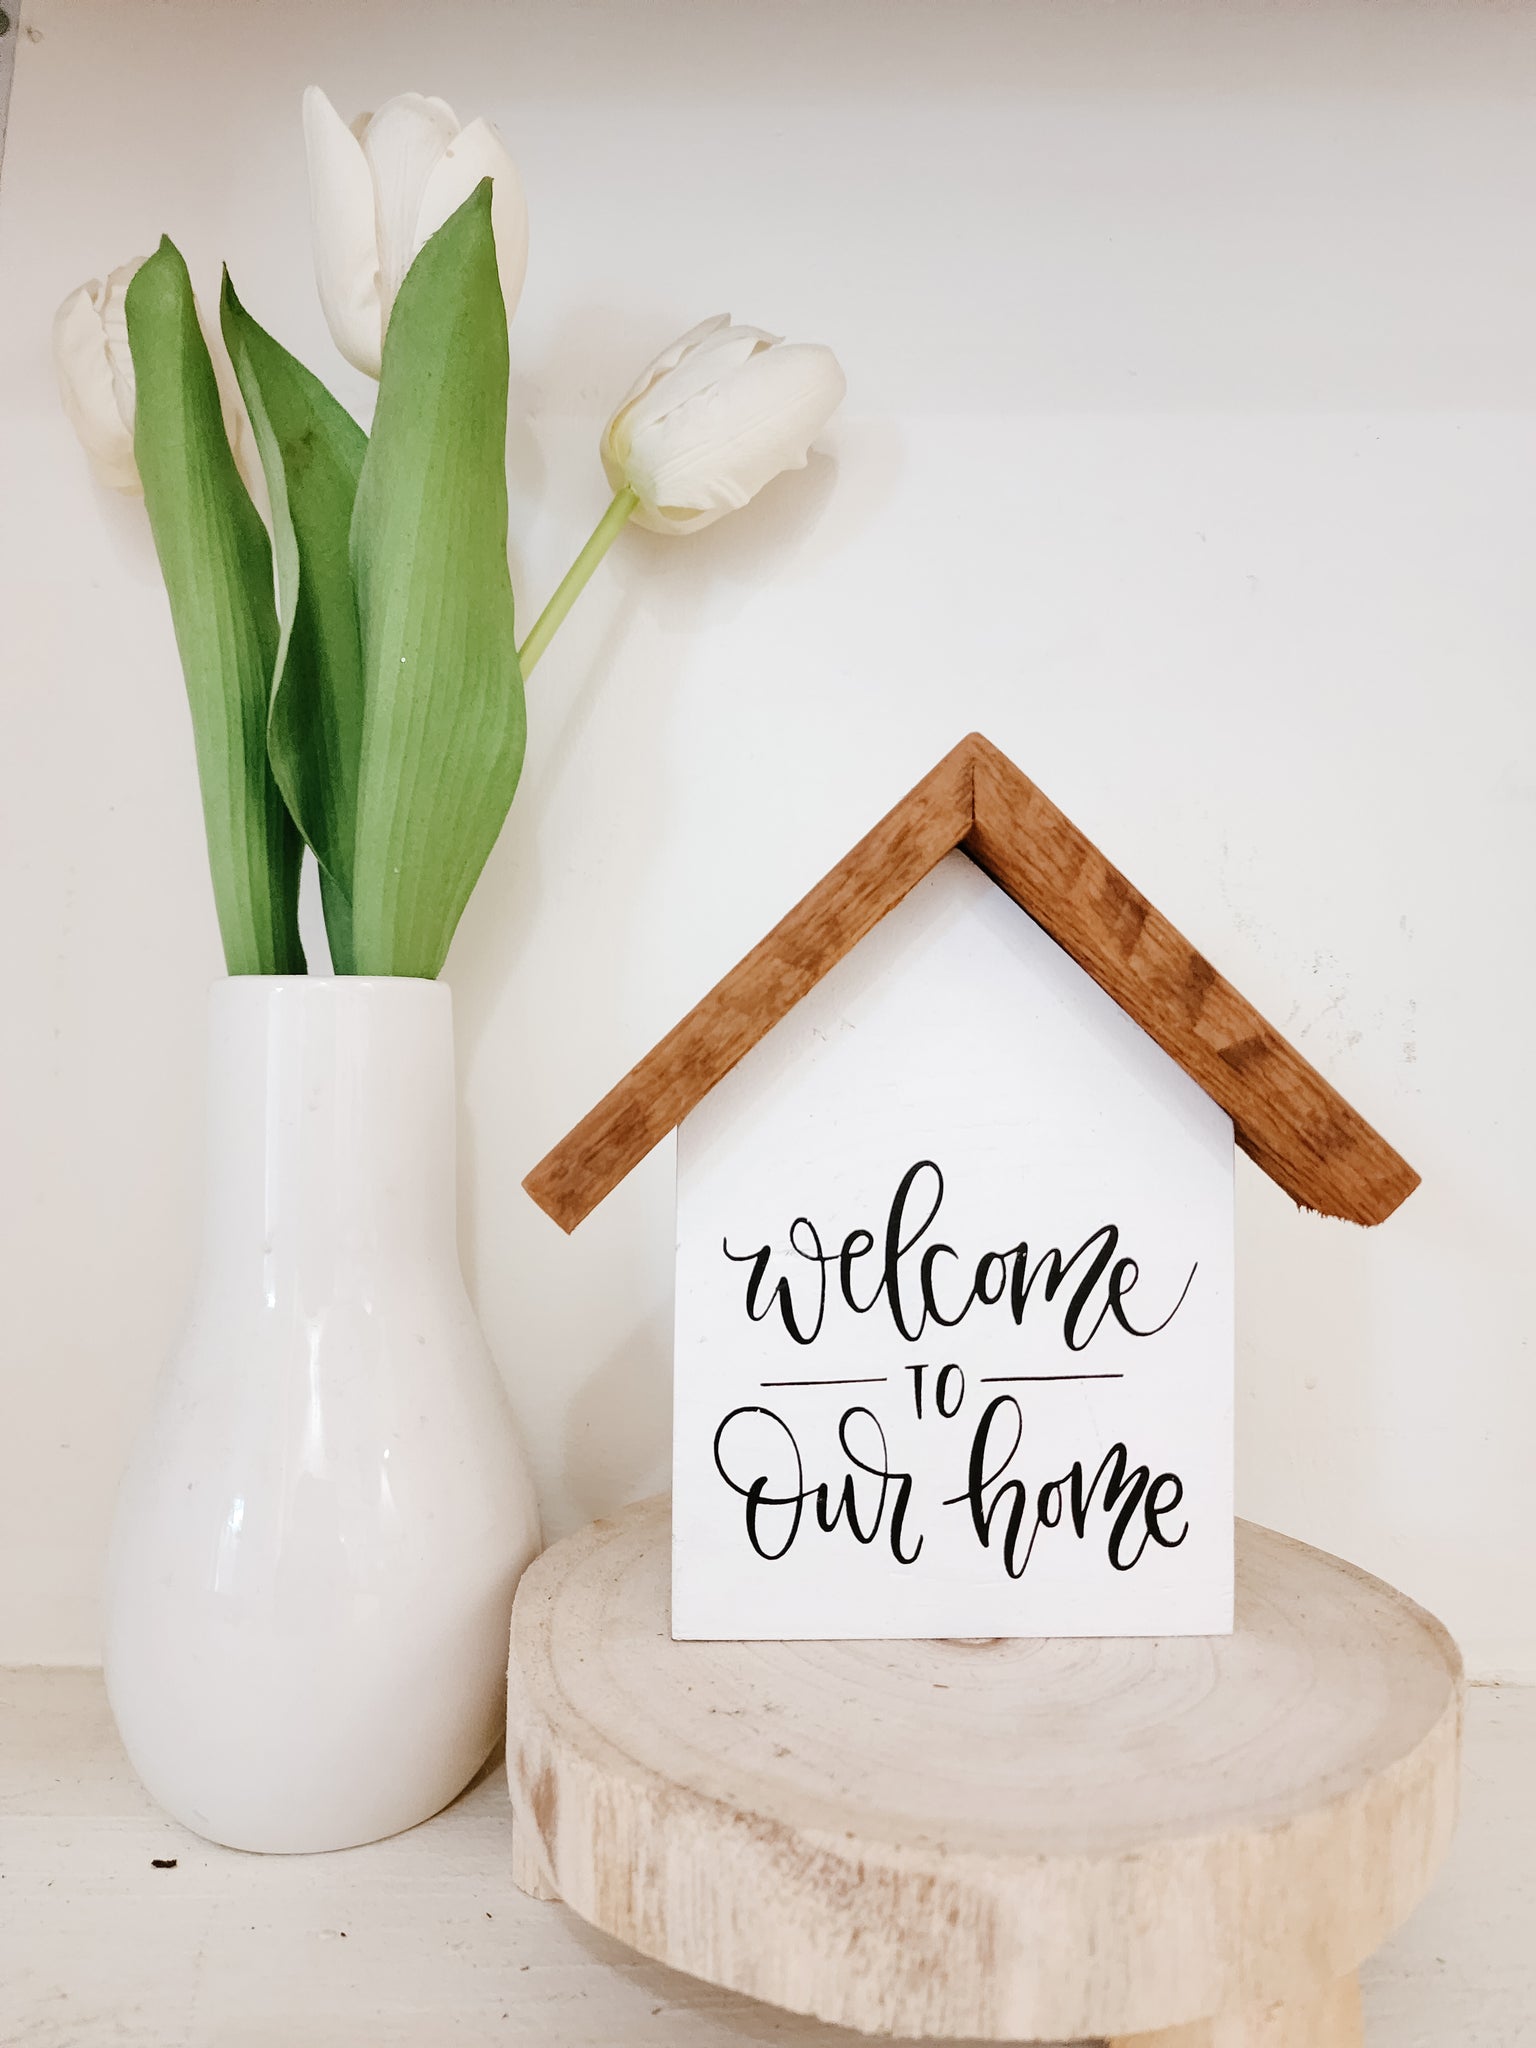 Small rustic house "Welcome to our home" sign